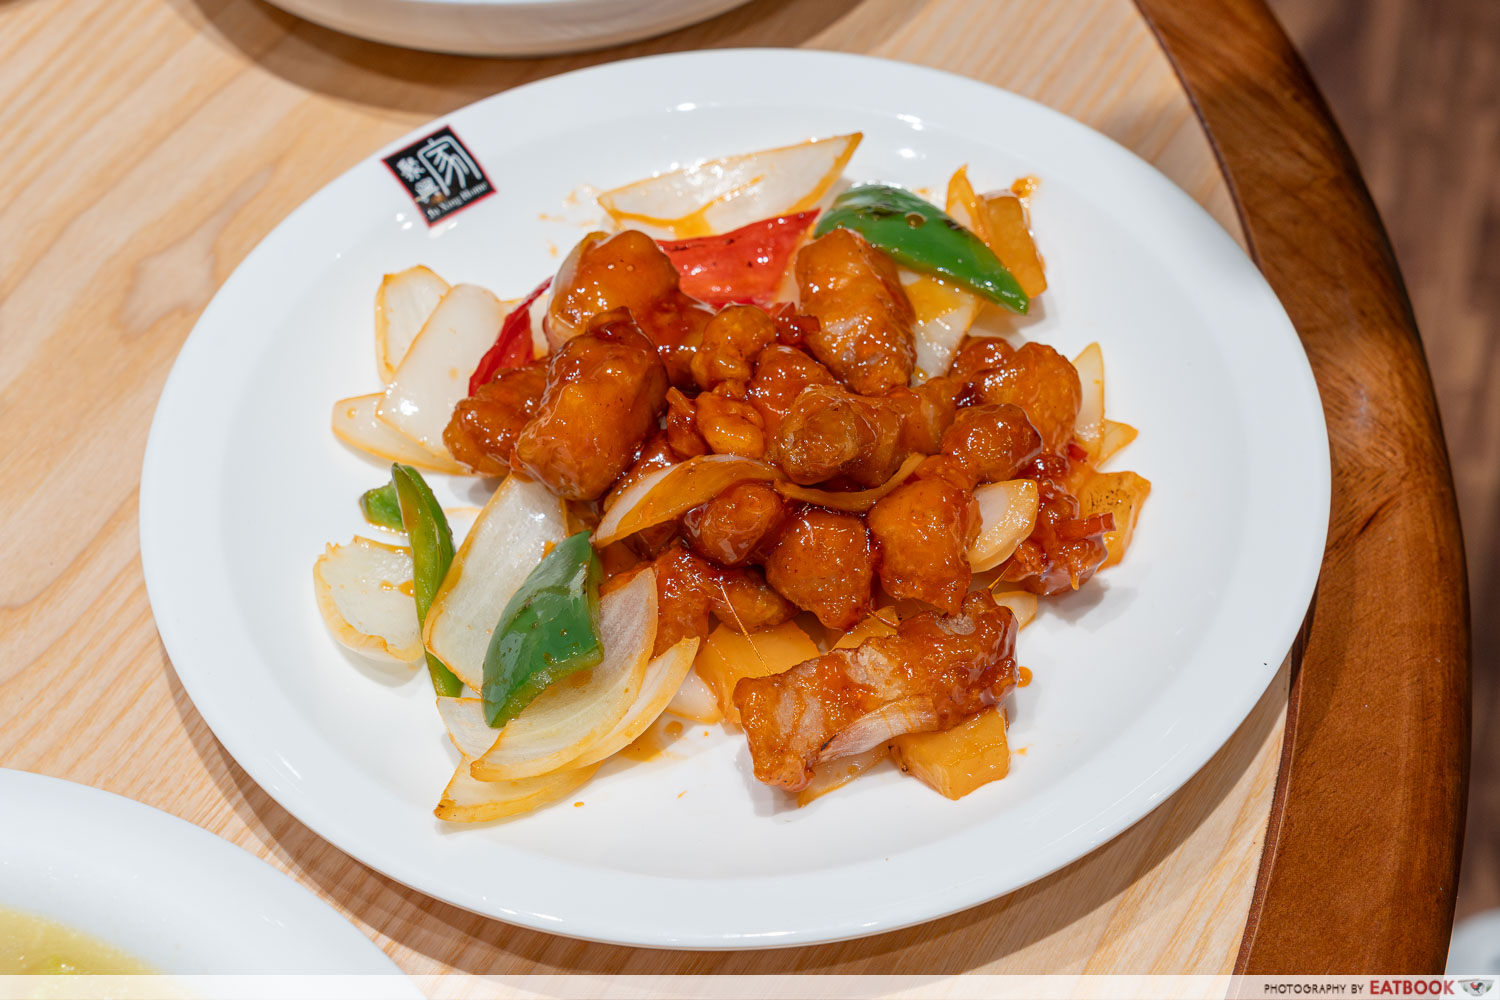 ju xing home - sweet and sour pork